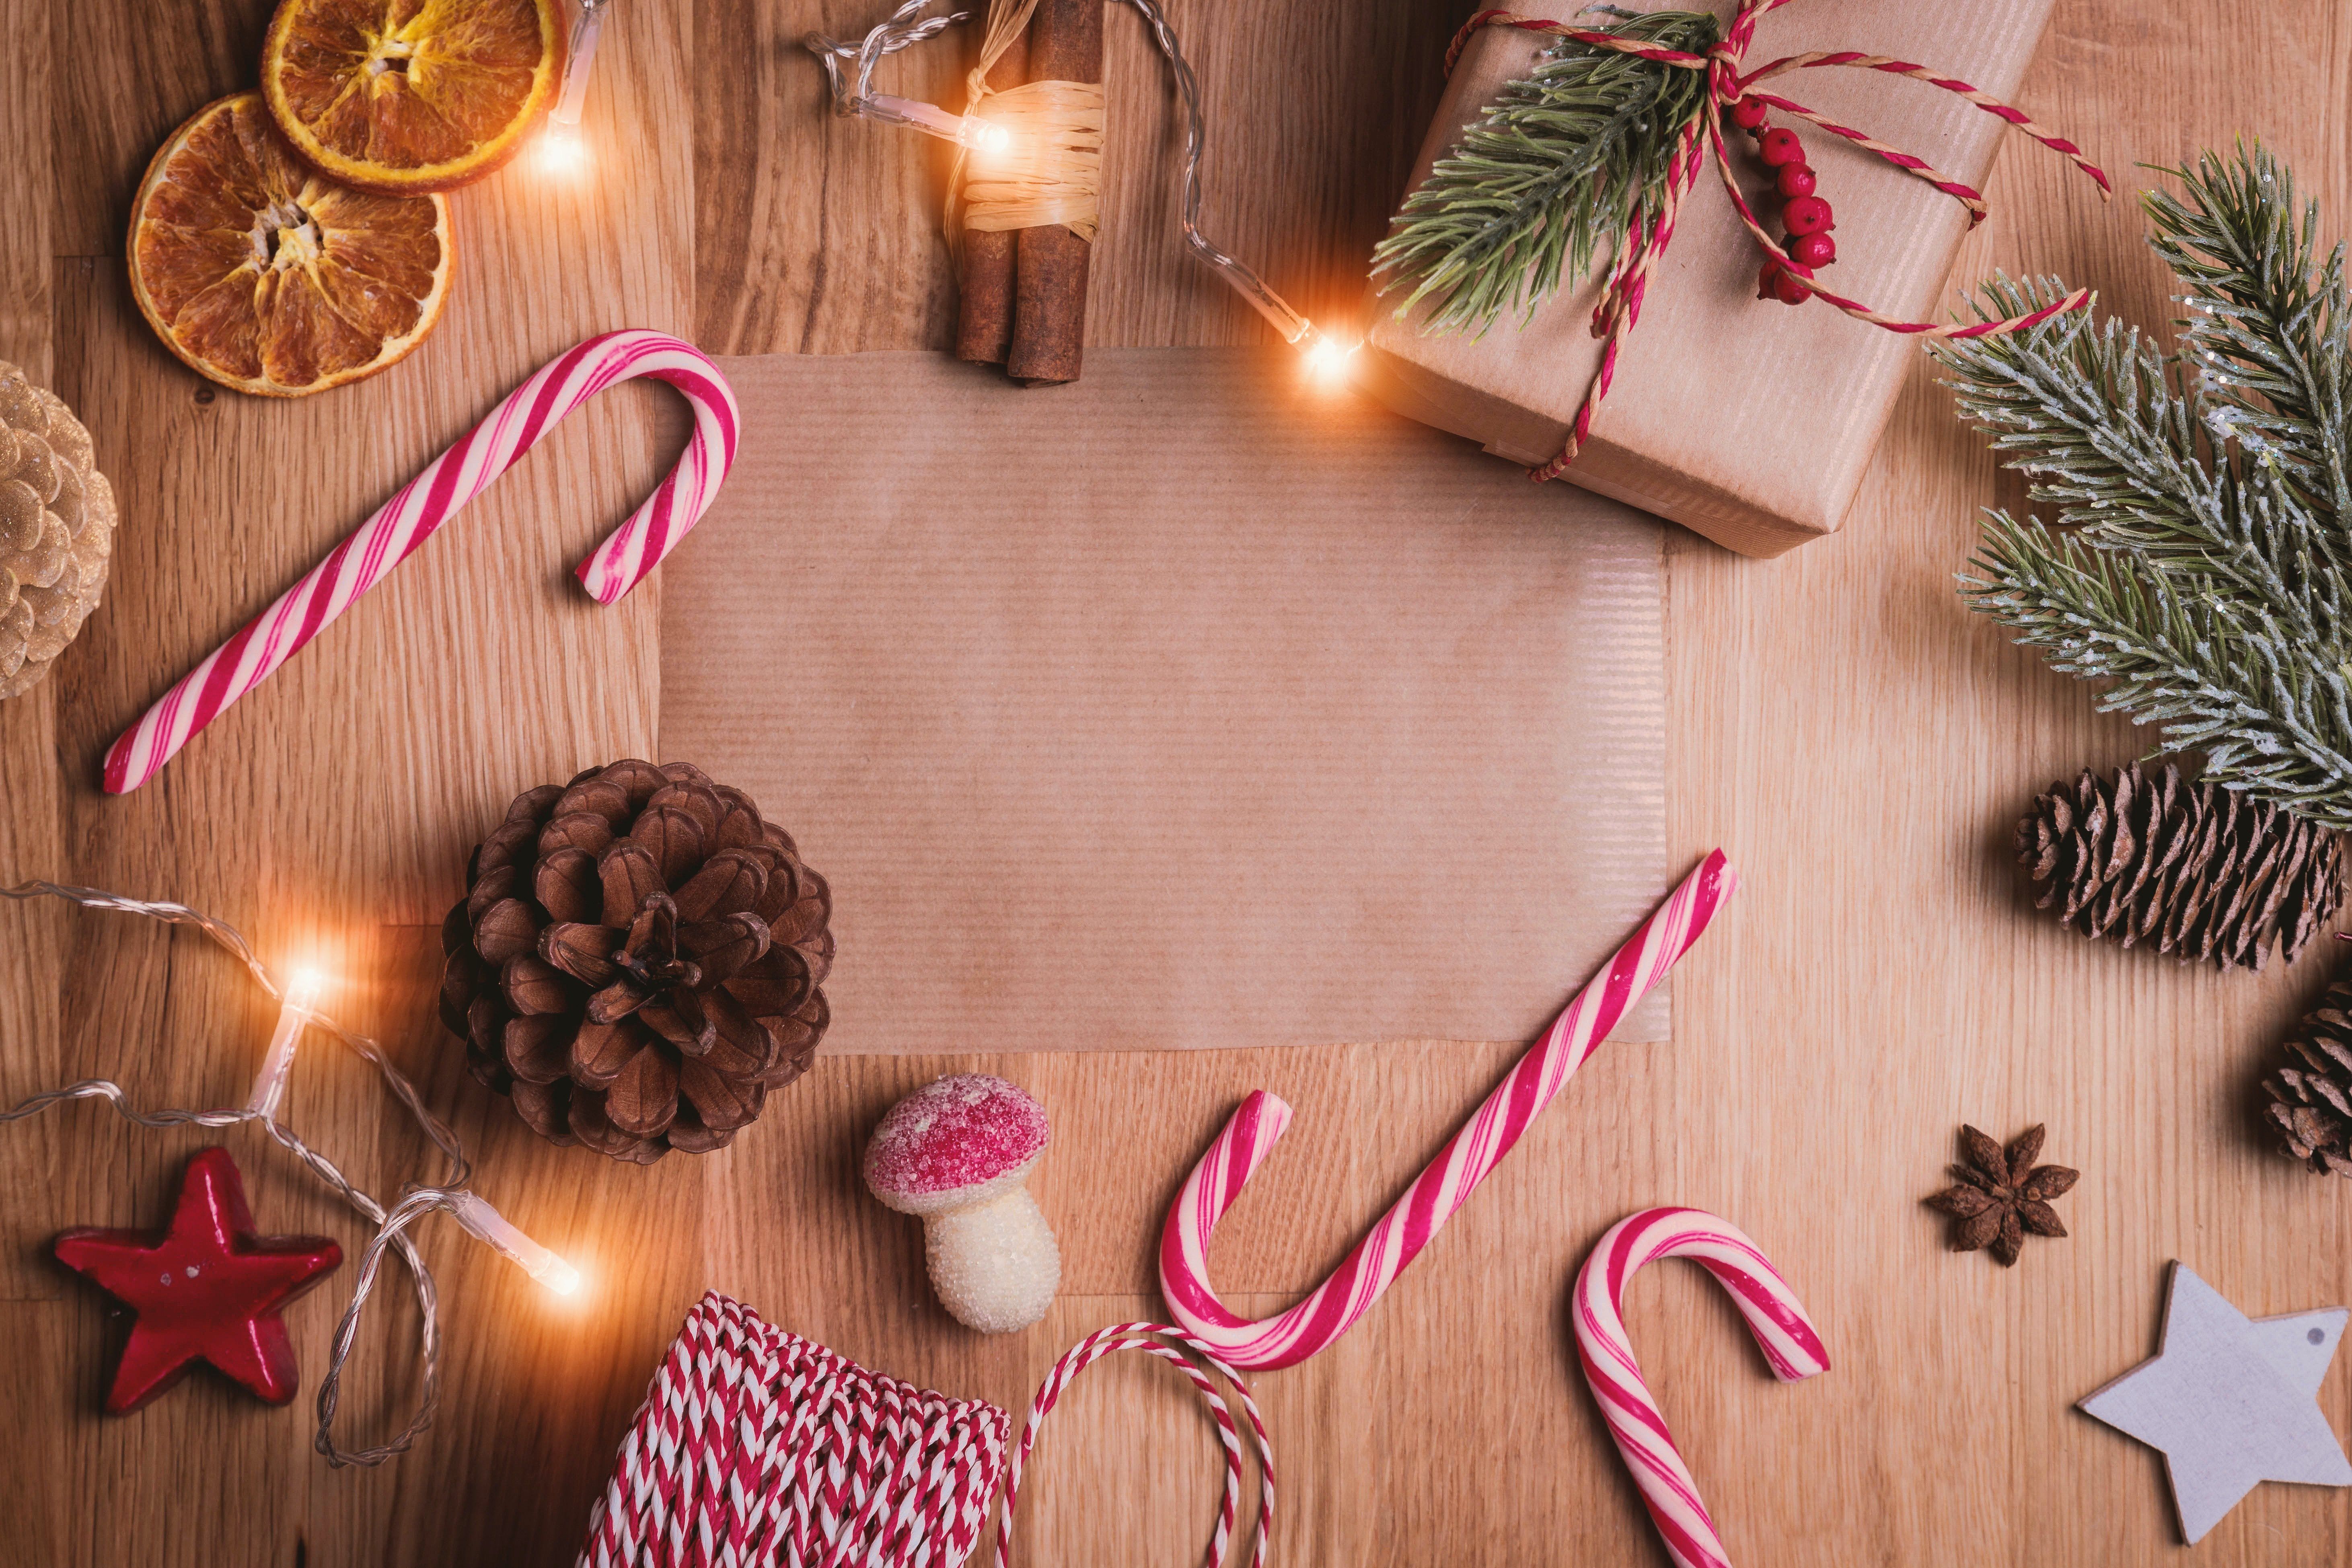 5 Classic Holiday Activities To Get You Into The Christmas Spirit